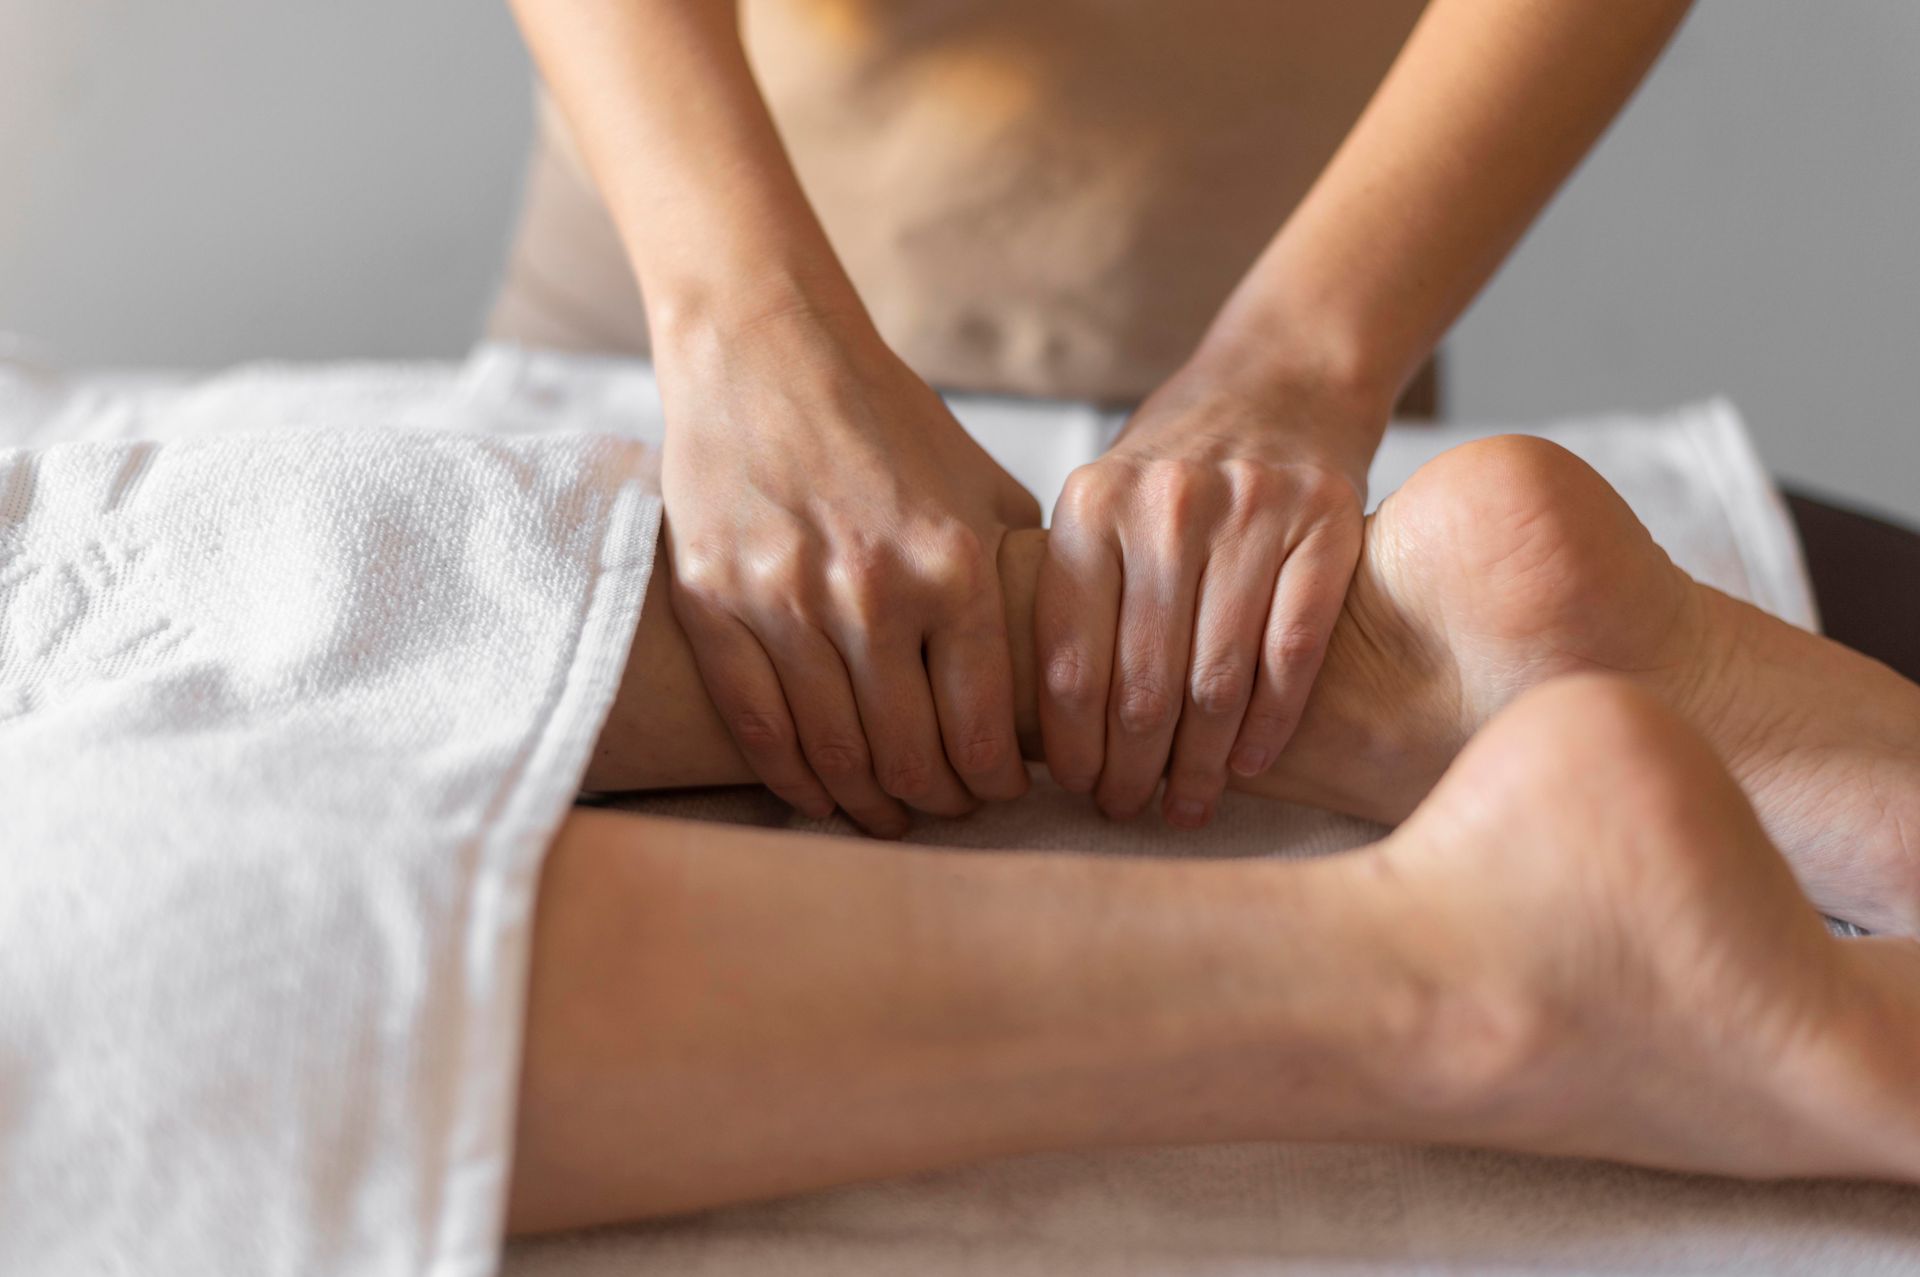 a woman is getting a massage on her leg in a spa .